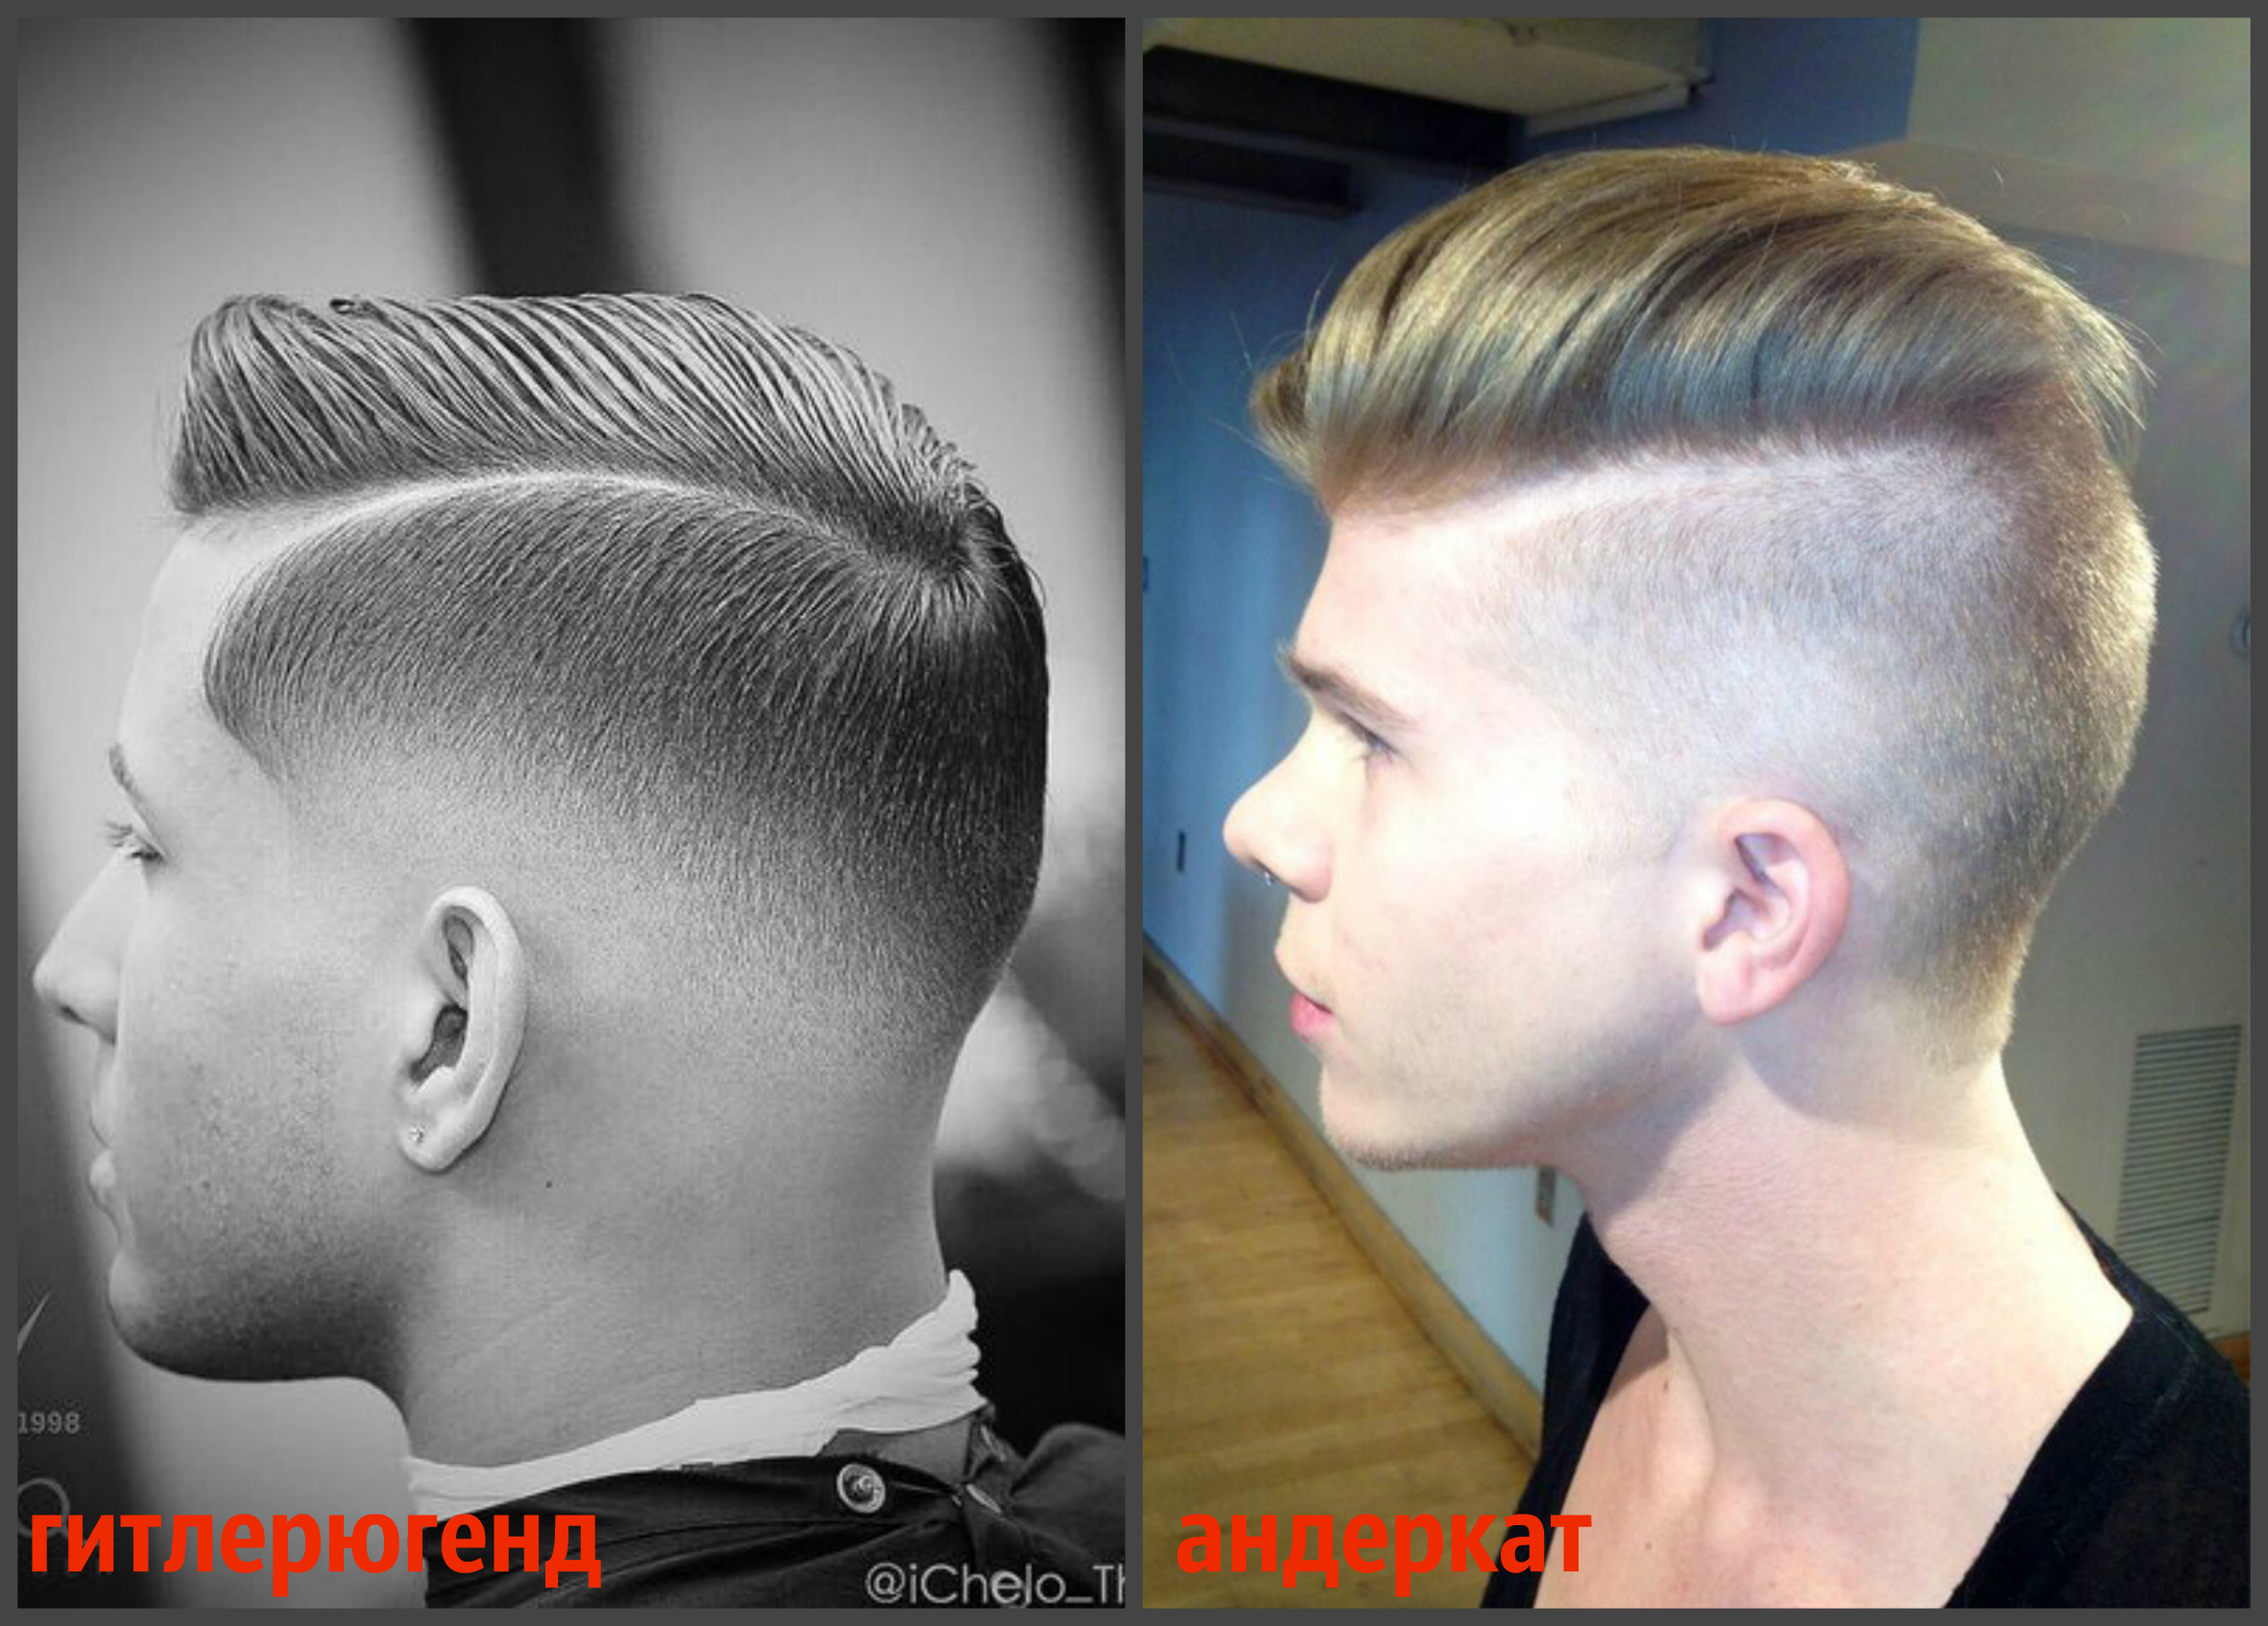 Comparison of Hitler Youth and Undercut haircuts